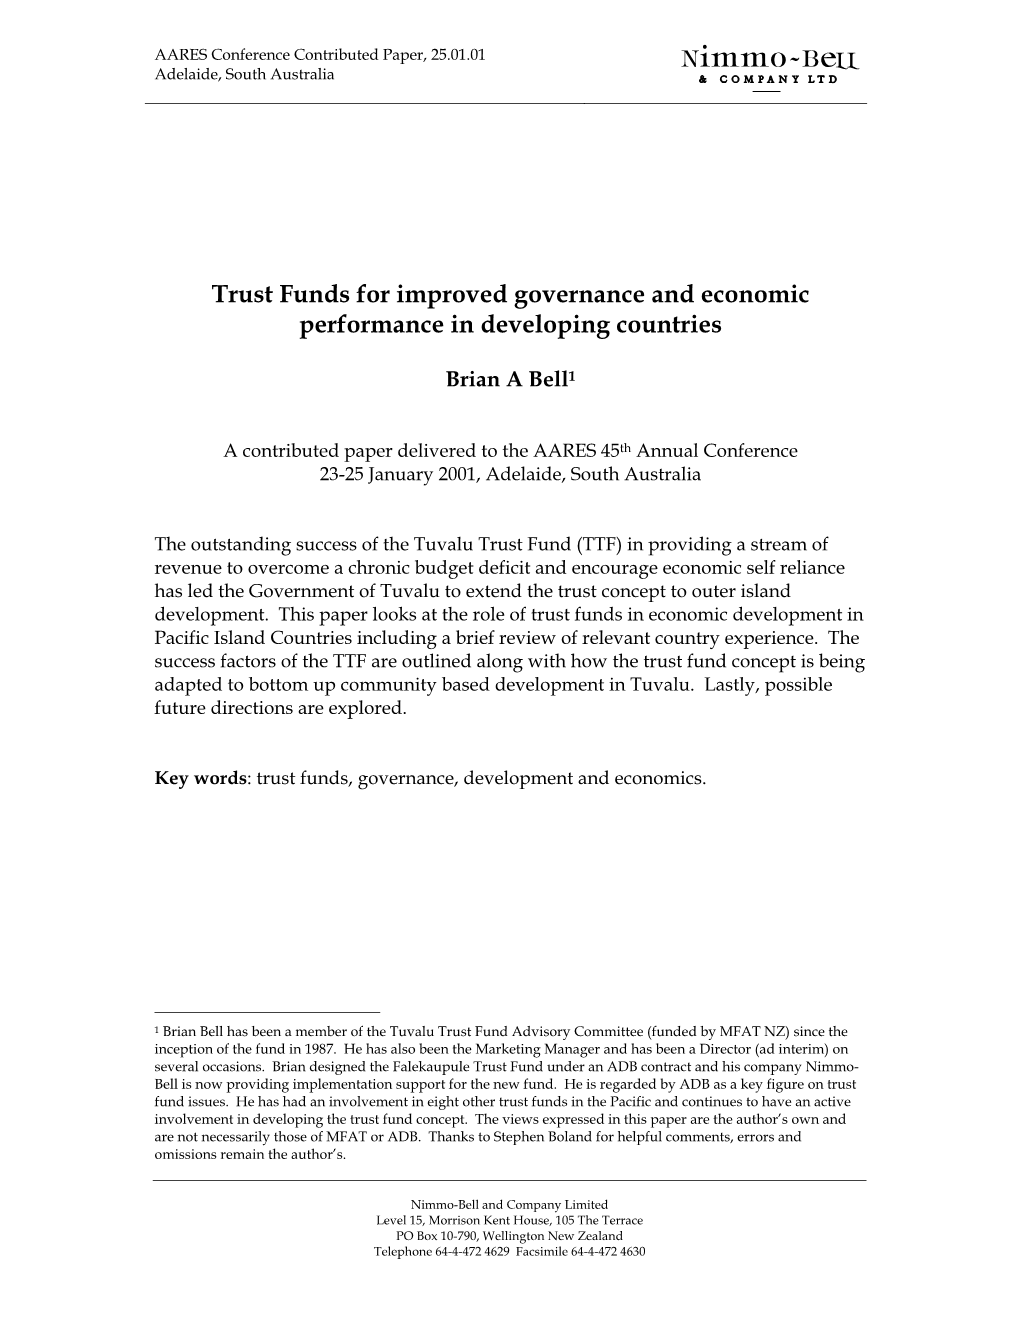 Trust Funds for Improved Governance and Economic Performance in Developing Countries